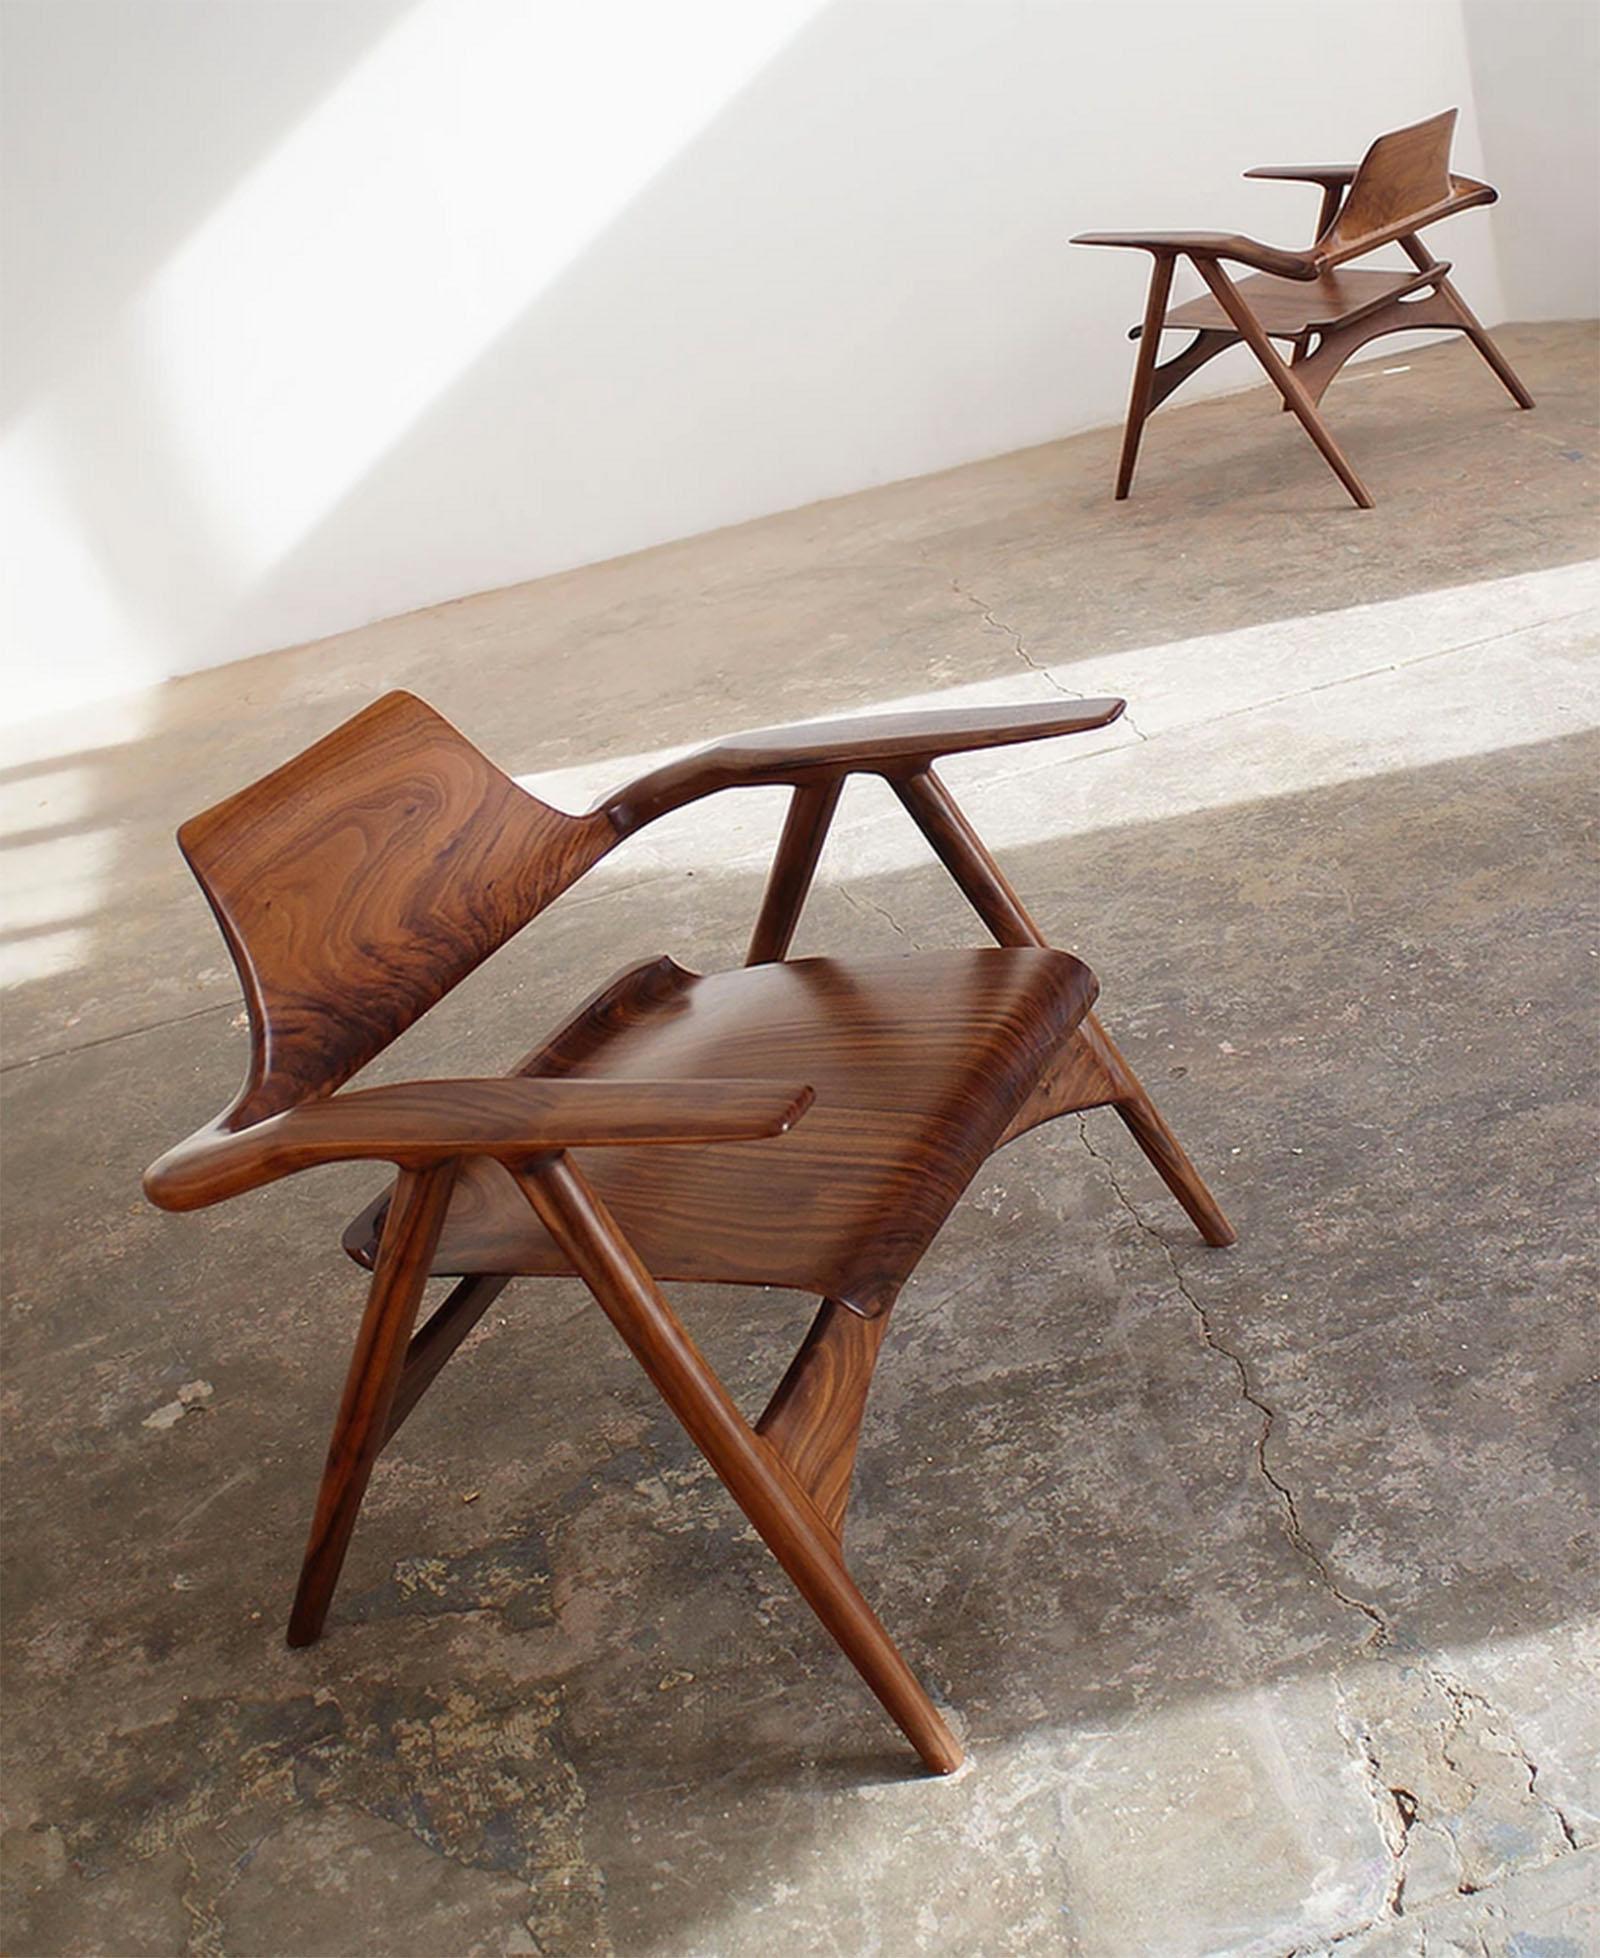 Modern Mantis Chair in Walnut Wood, Hand-Sculpted Chair by Kokora For Sale